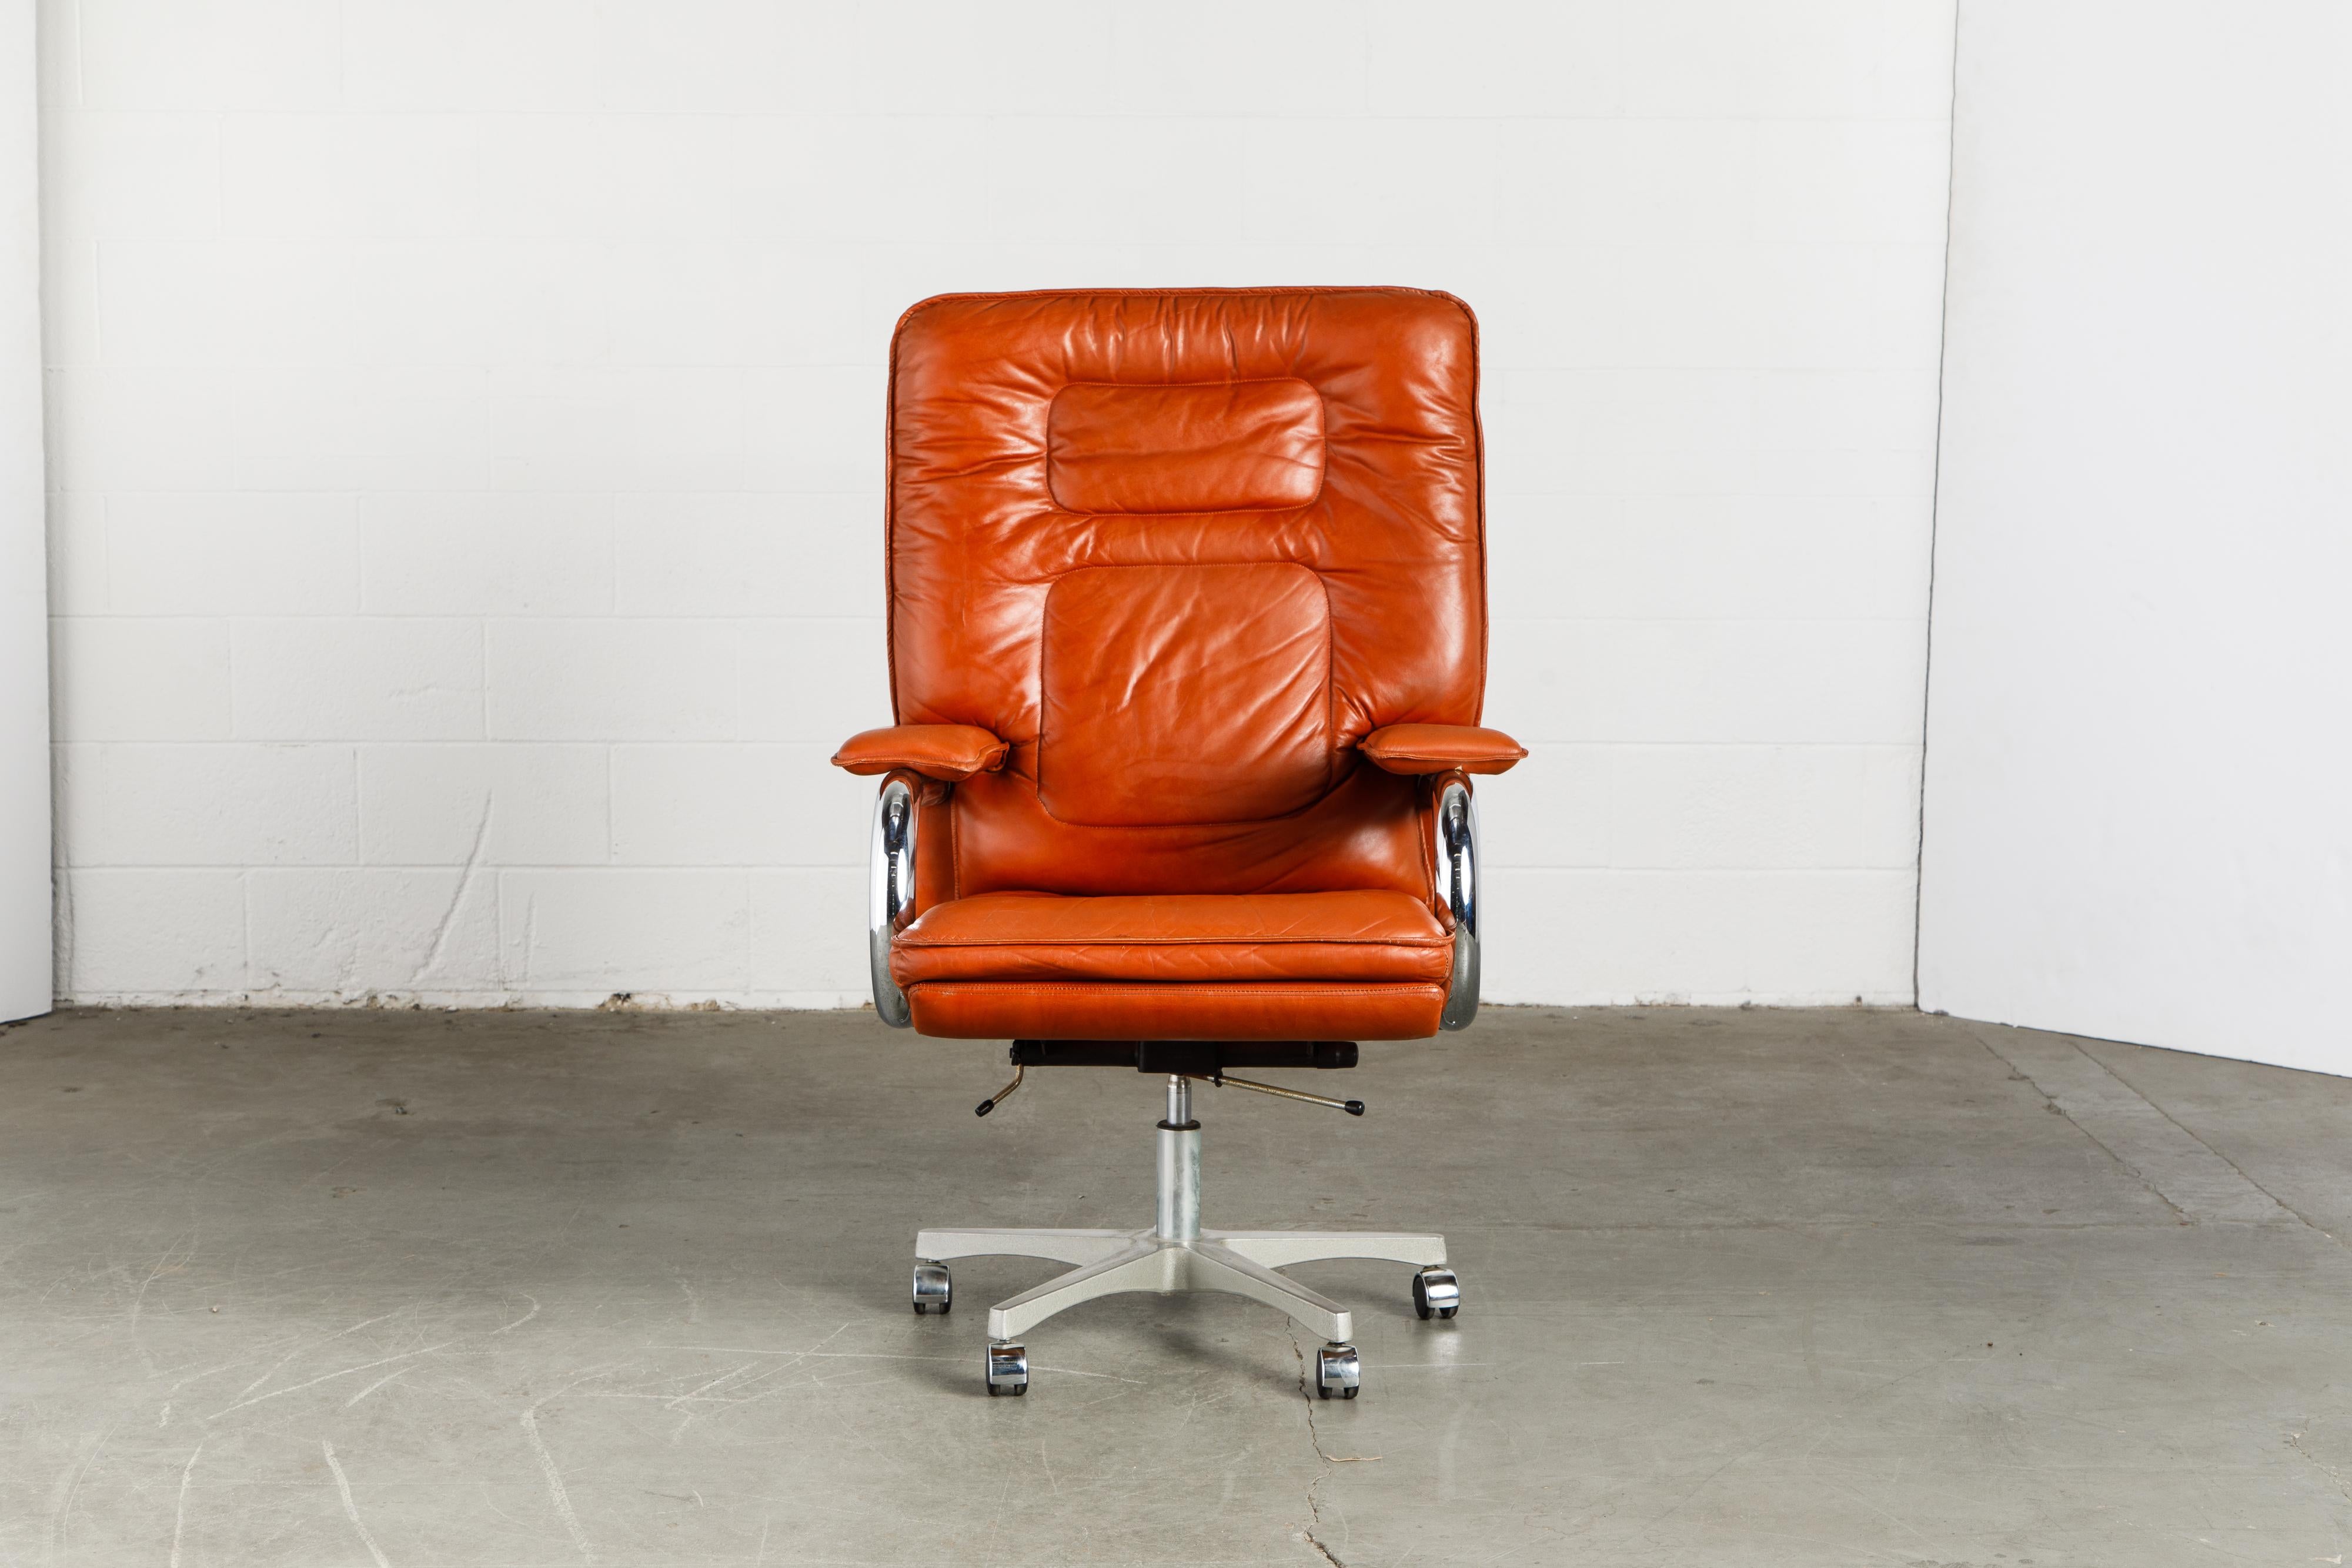 This incredible executives chair is named 'Big', designed by Guido Faleschini by i4 Mariani for The Pace Collection. This 1970s / 1980s large scale high back executive swivel desk chair retains its original high-quality and supple cognac / caramel